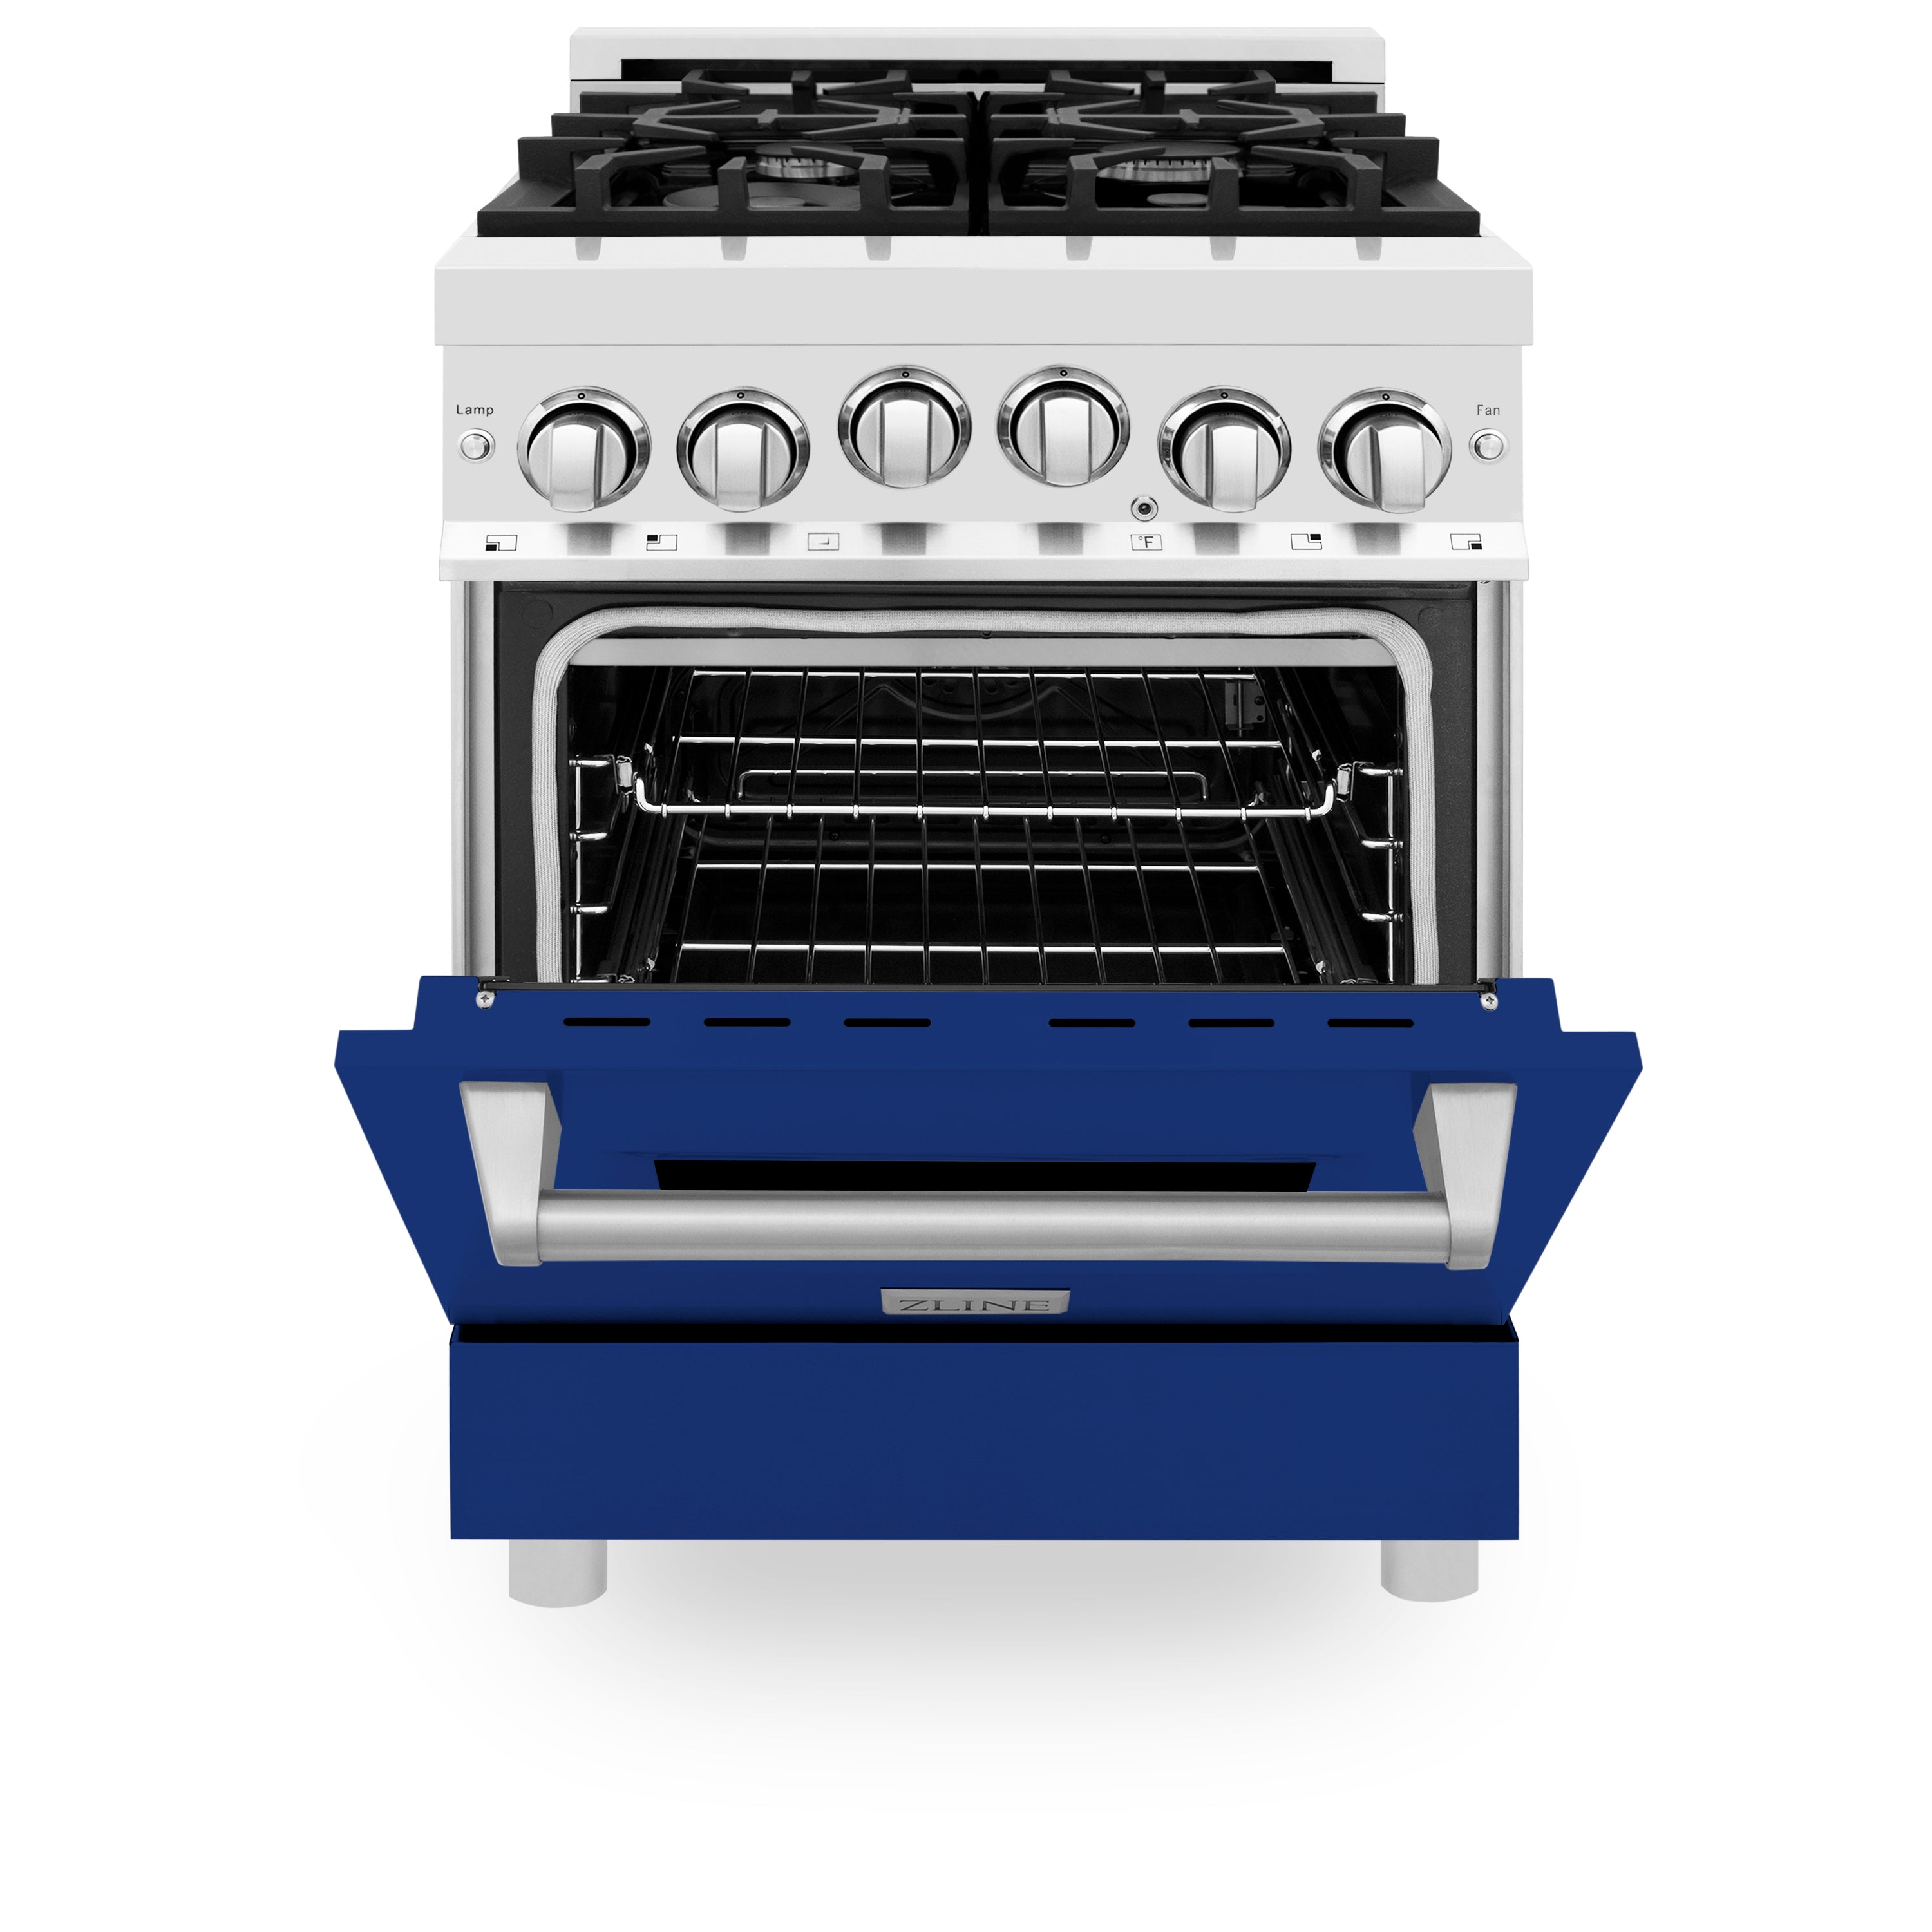 ZLINE 24" 2.8 cu. ft. Range with Gas Stove and Gas Oven in Stainless Steel and Blue Gloss Door (RG-BG-24)